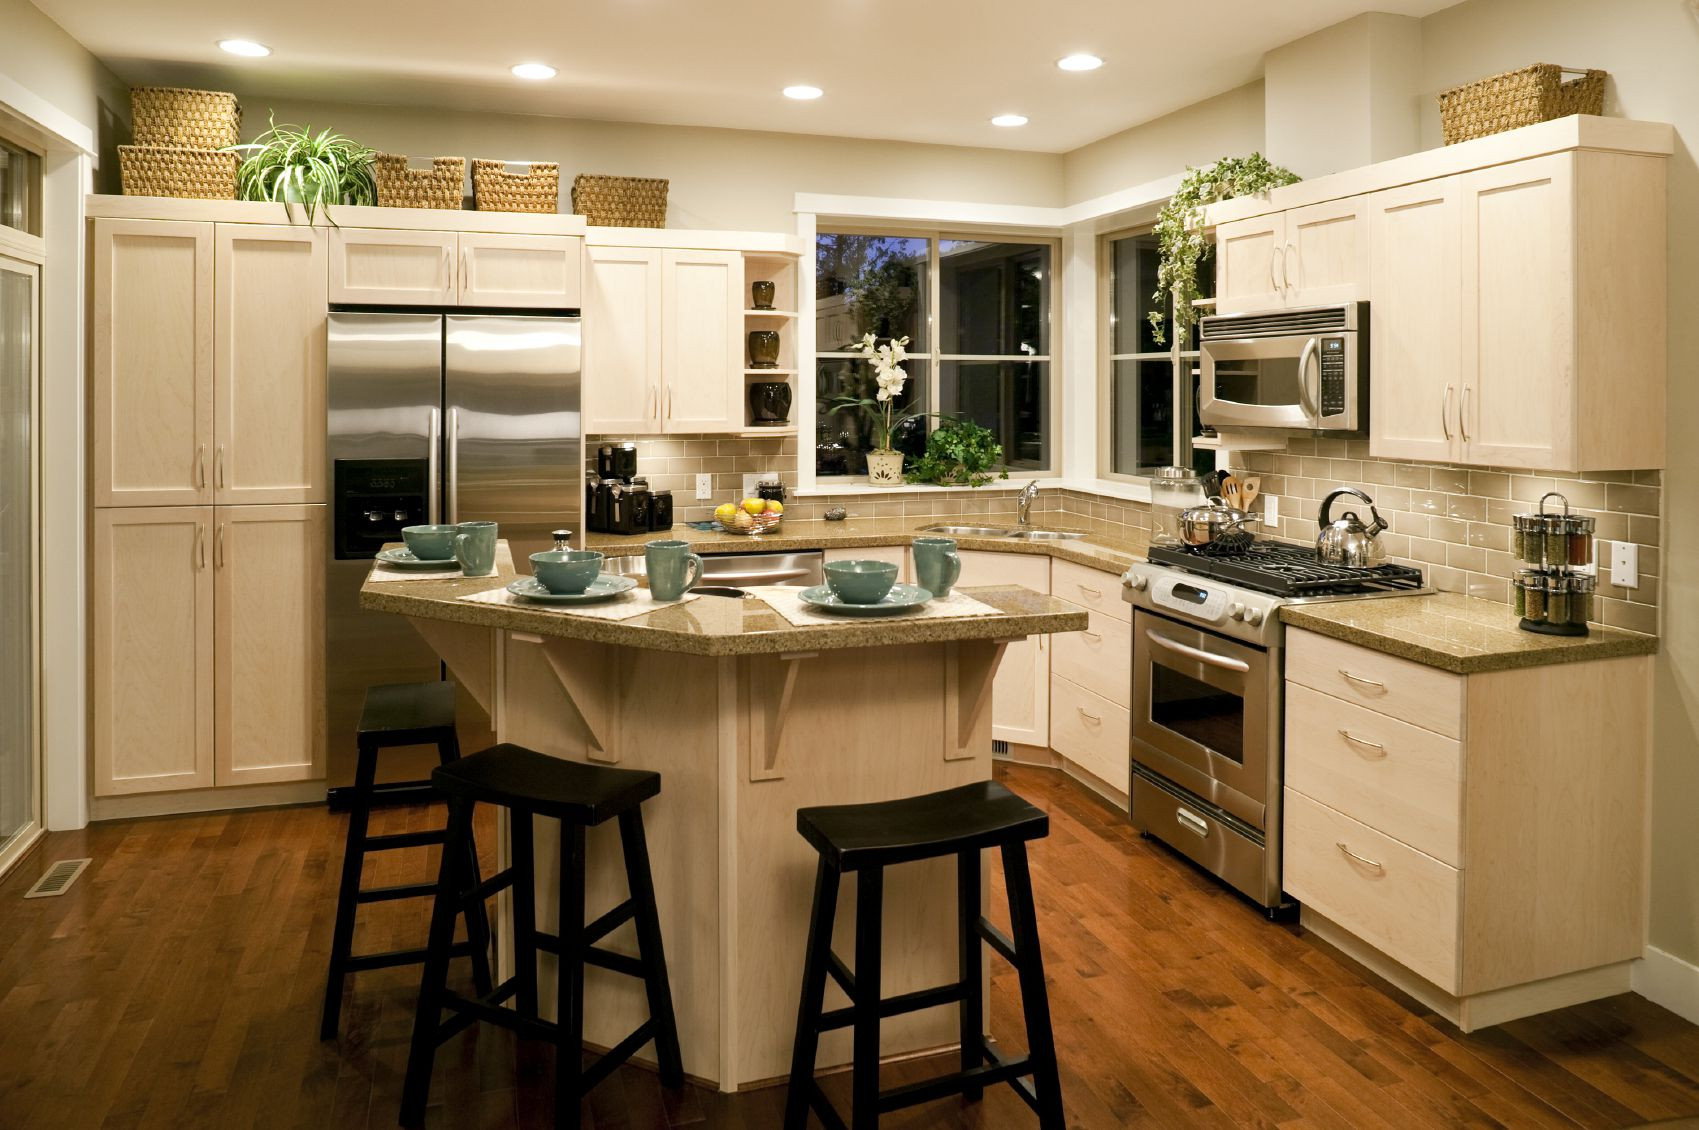 Kitchen Island For Small Kitchen
 Awesome Kitchen Island Designs to Realize Well Designed